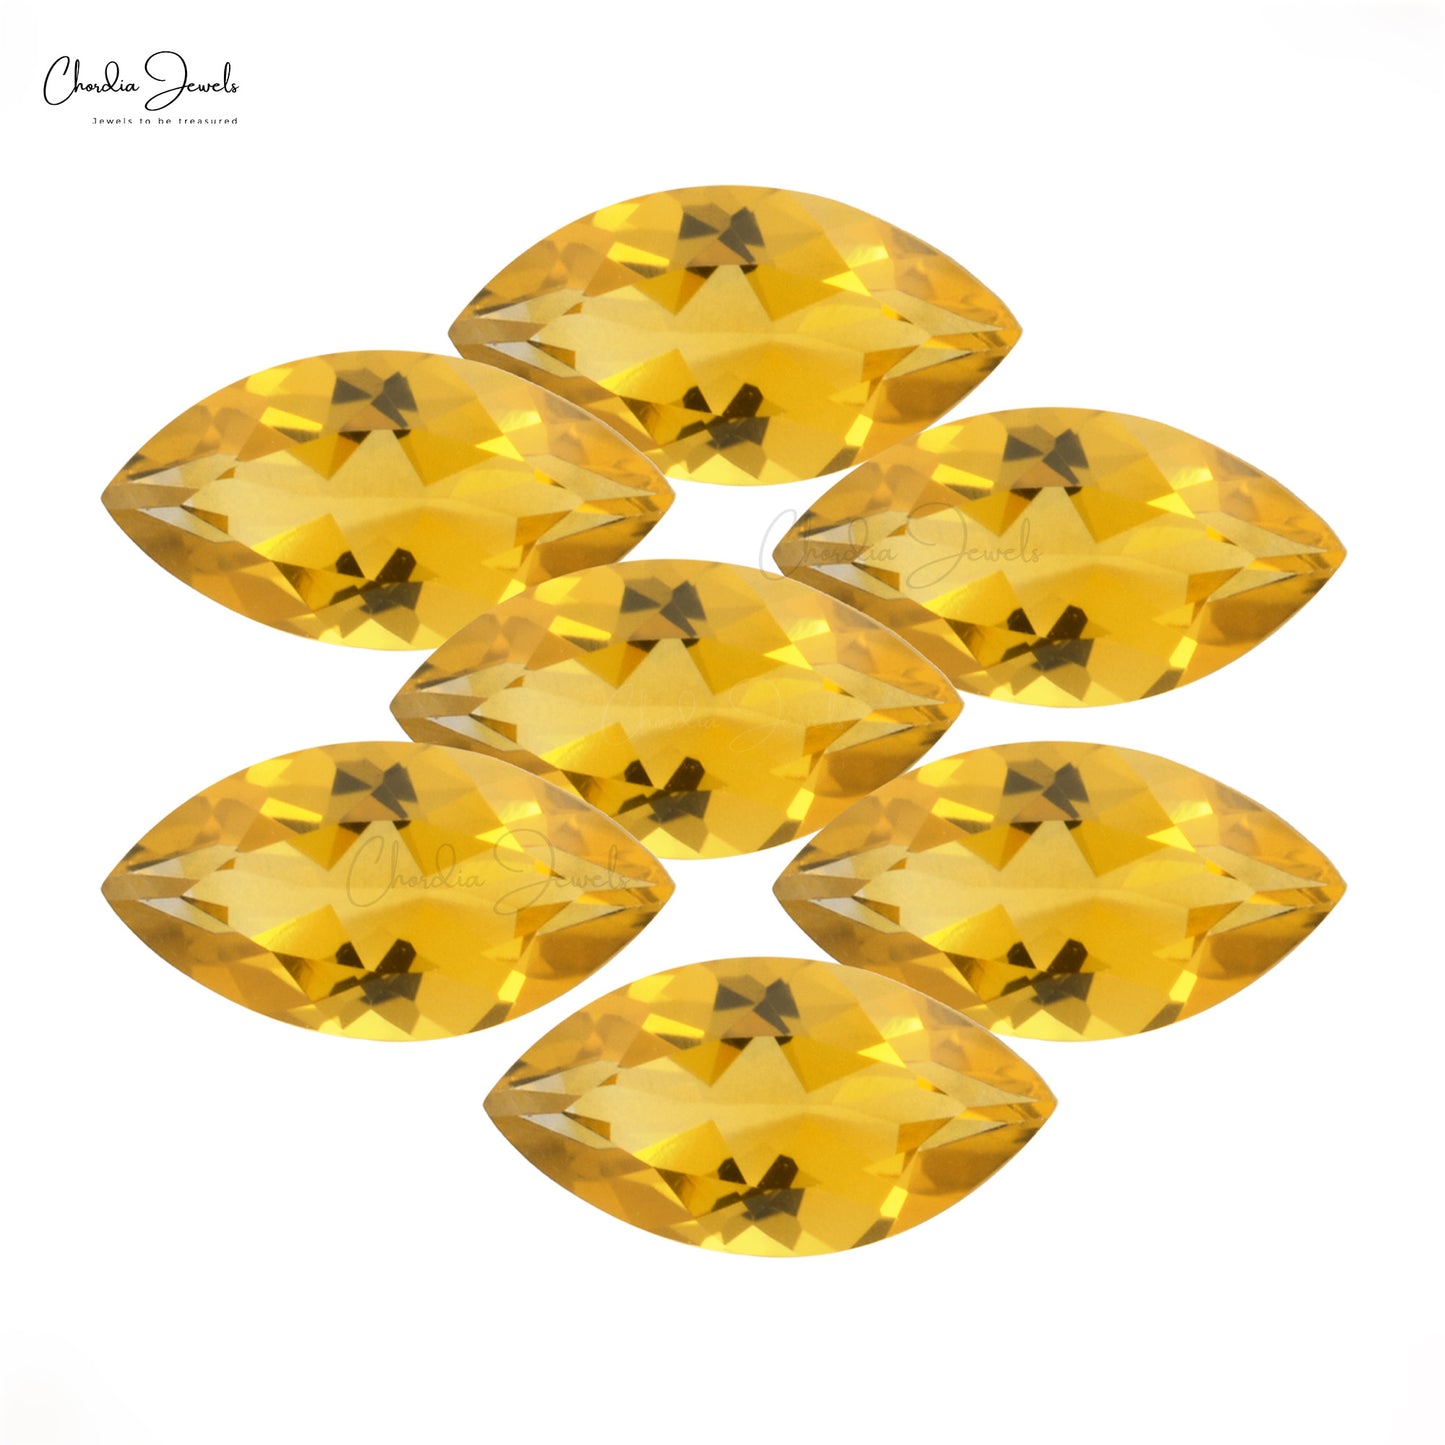 Wholesale Natural 6X3MM Citrine Loose Gemstone for Sale, 1 Piece